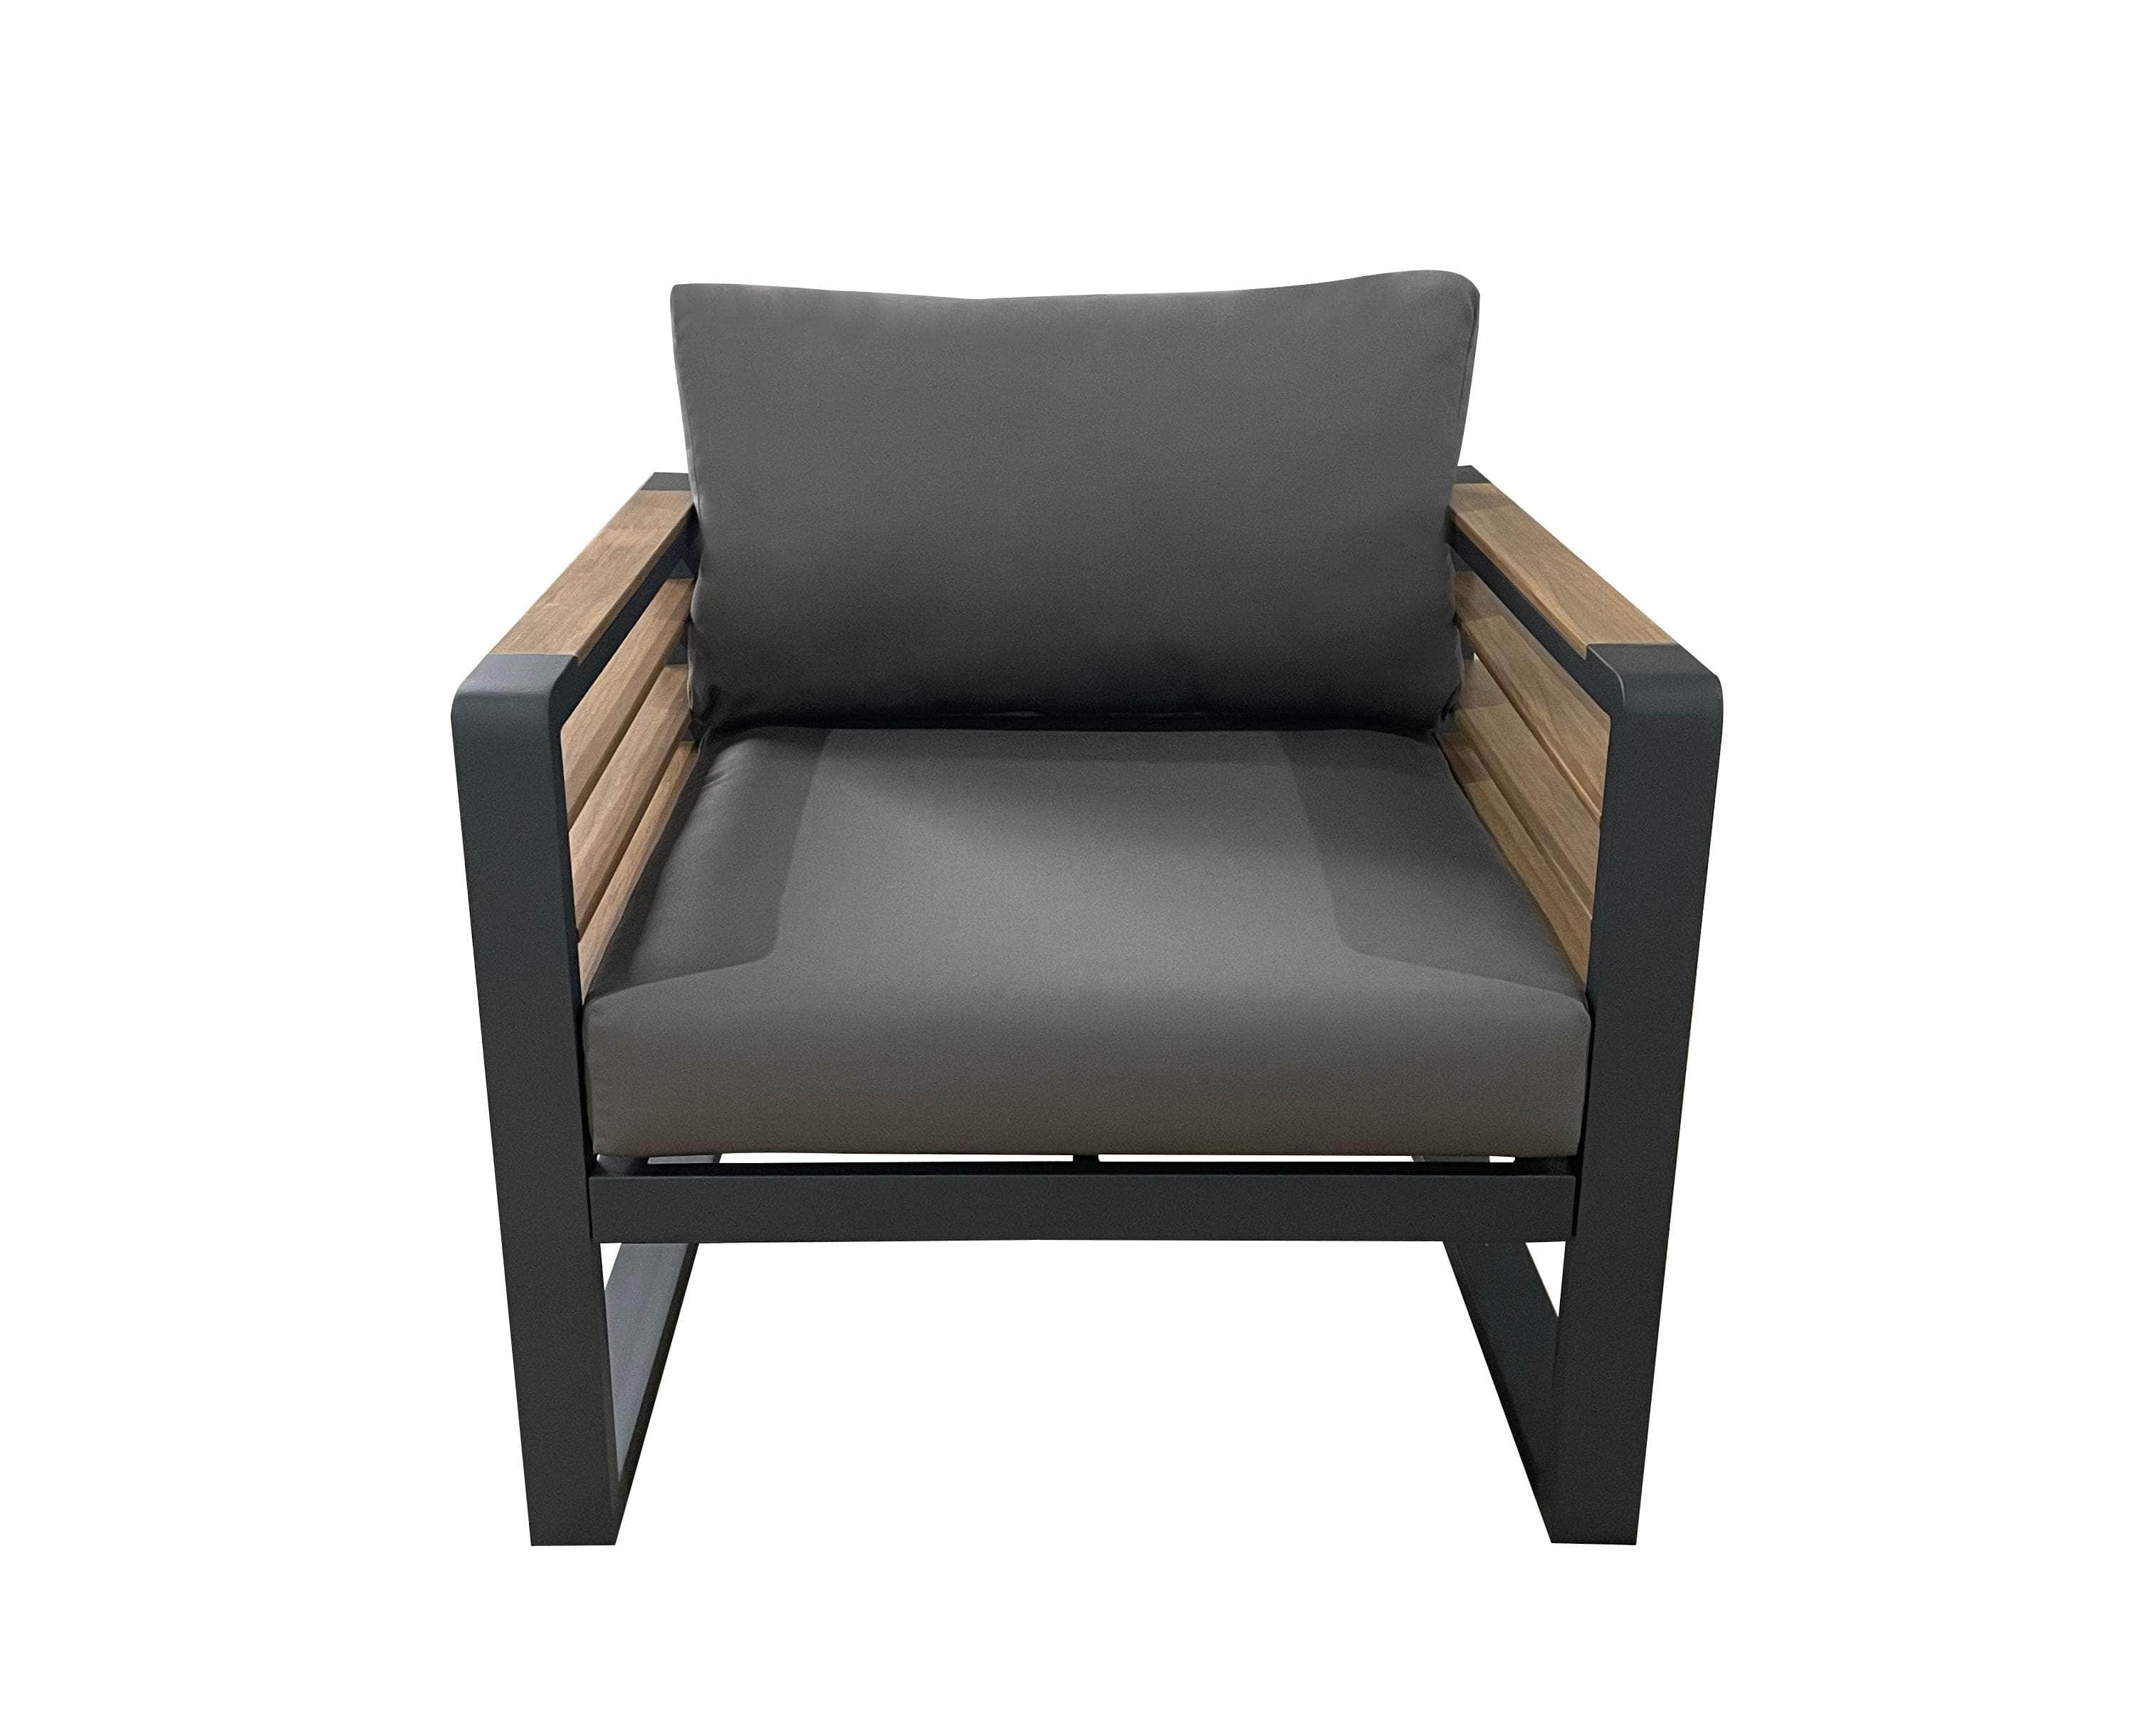 CIEUX Club Chair Canvas Charcoal Avignon Outdoor Patio Aluminum Metal Club Chair in Black with Sunbrella Cushions - Available in 2 Colours